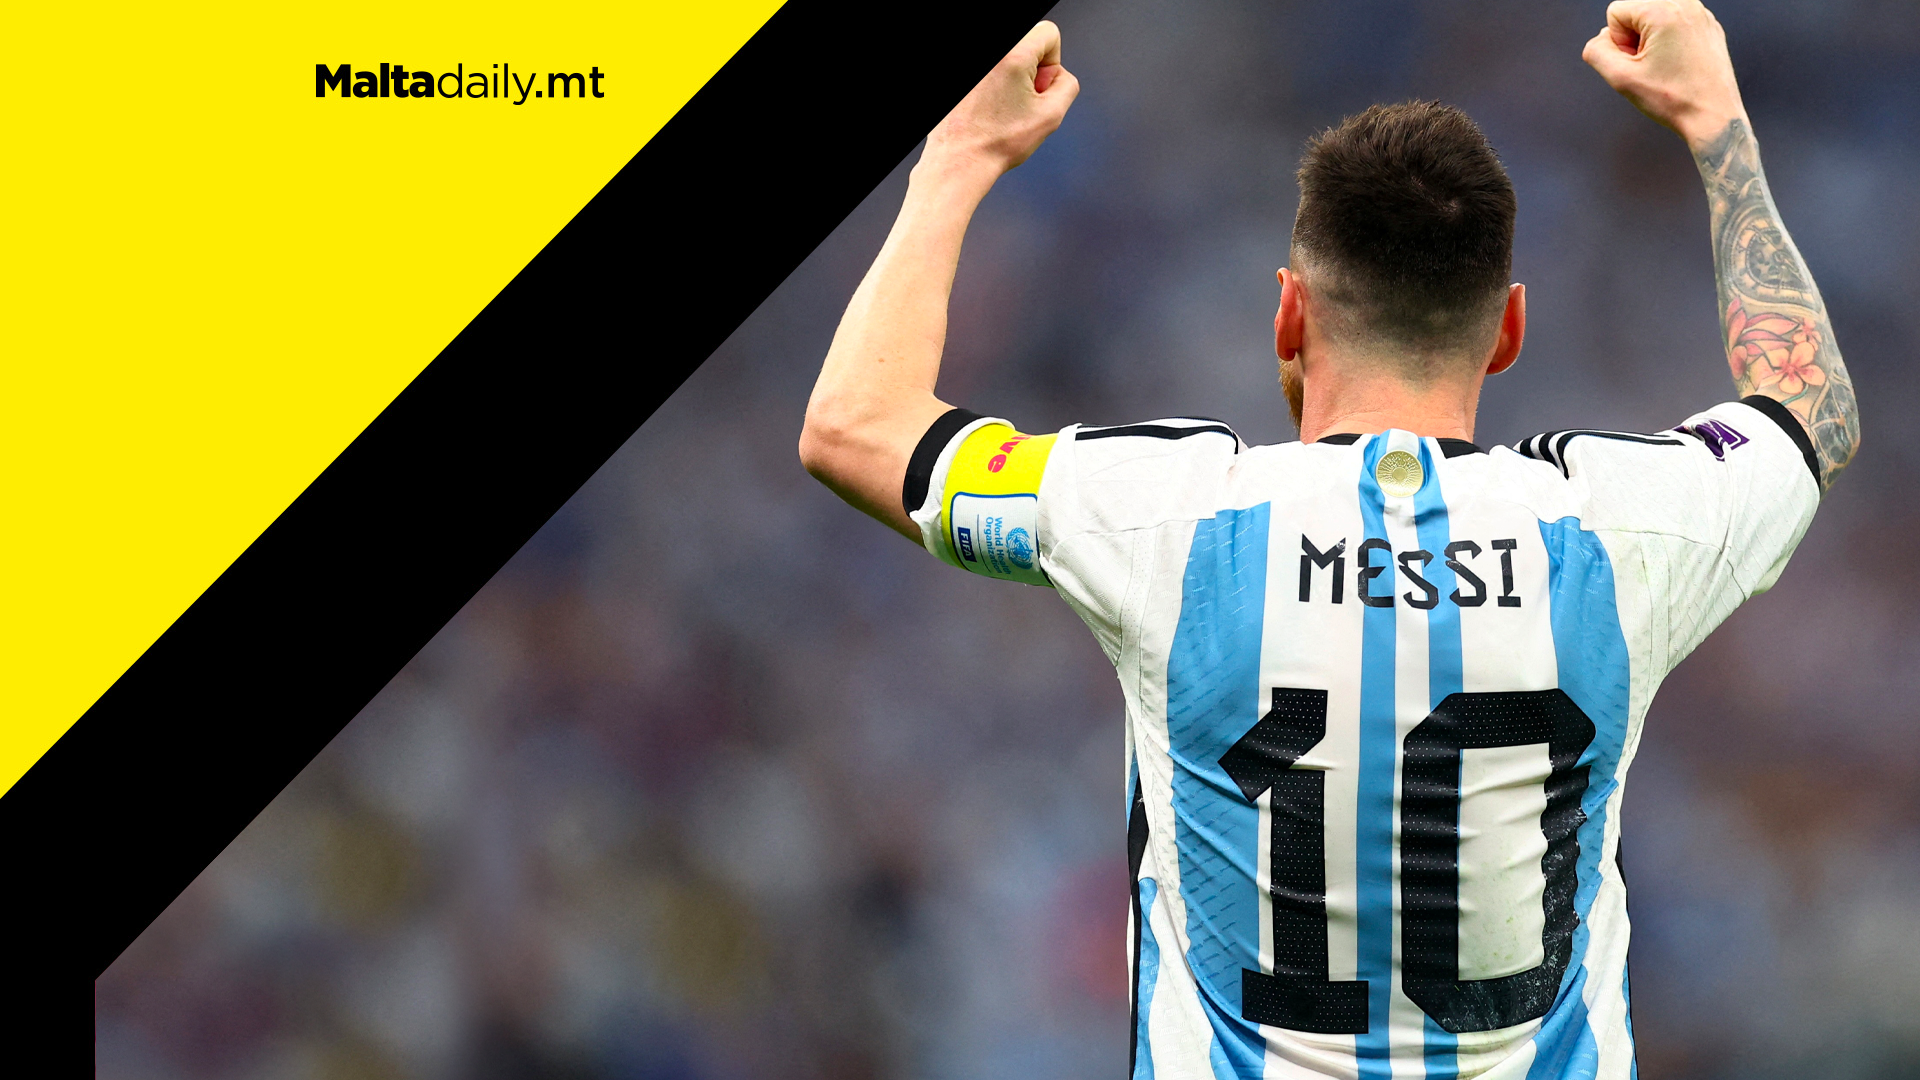 Lionel Messi's Argentina shirt is sold out worldwide